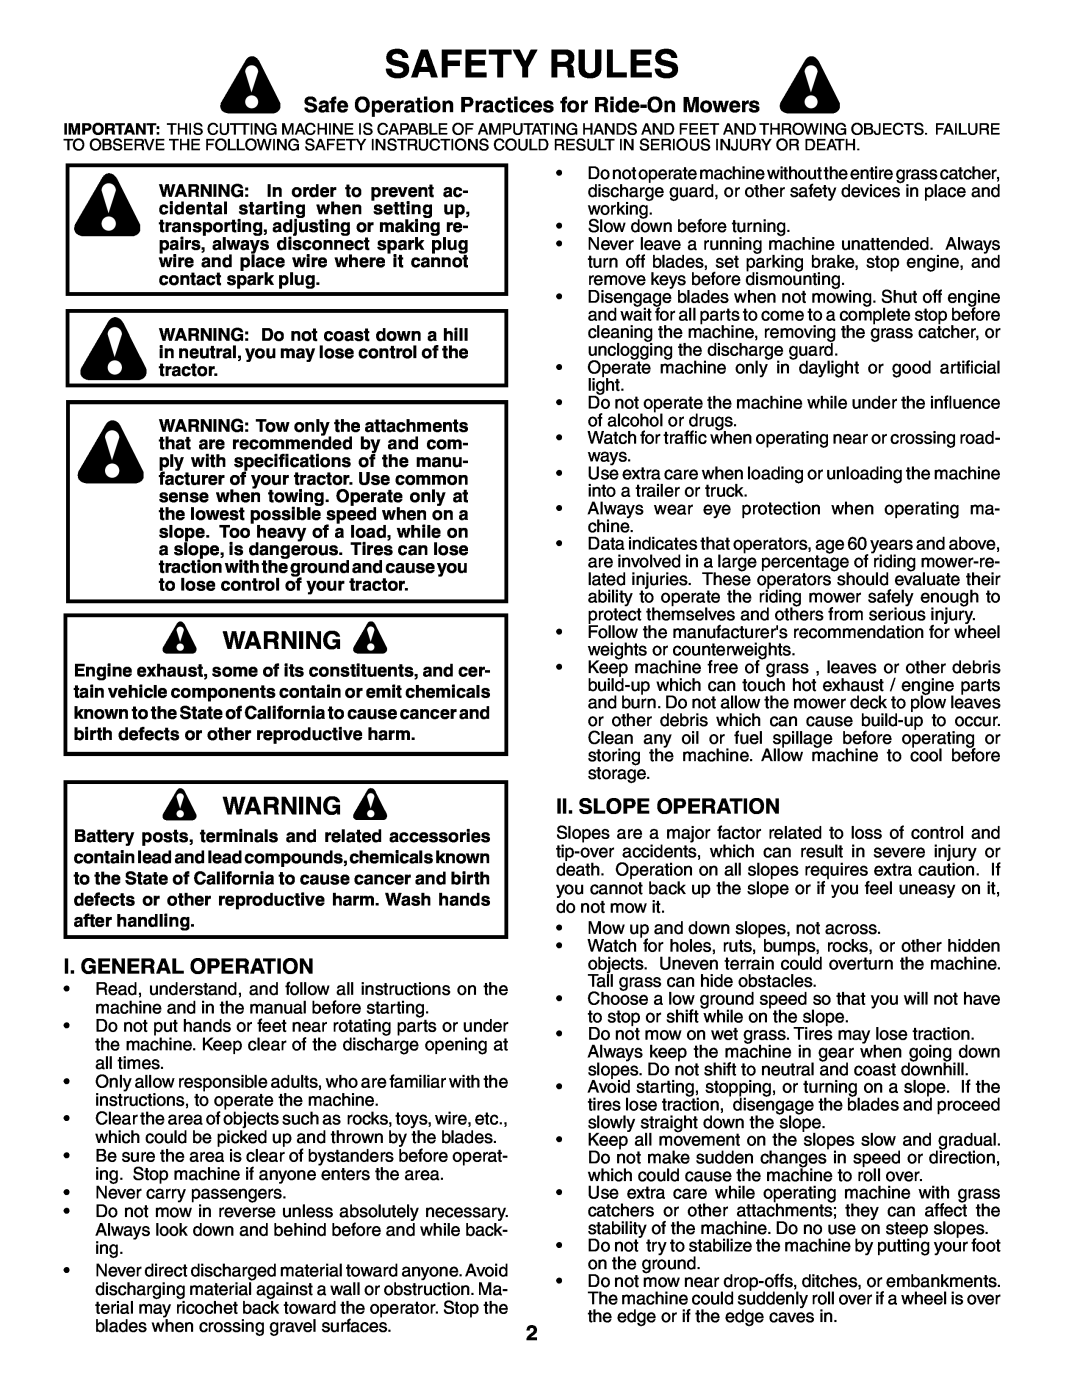 Poulan 195021 manual Safety Rules, Safe Operation Practices for Ride-On Mowers, I. General Operation, Ii. Slope Operation 